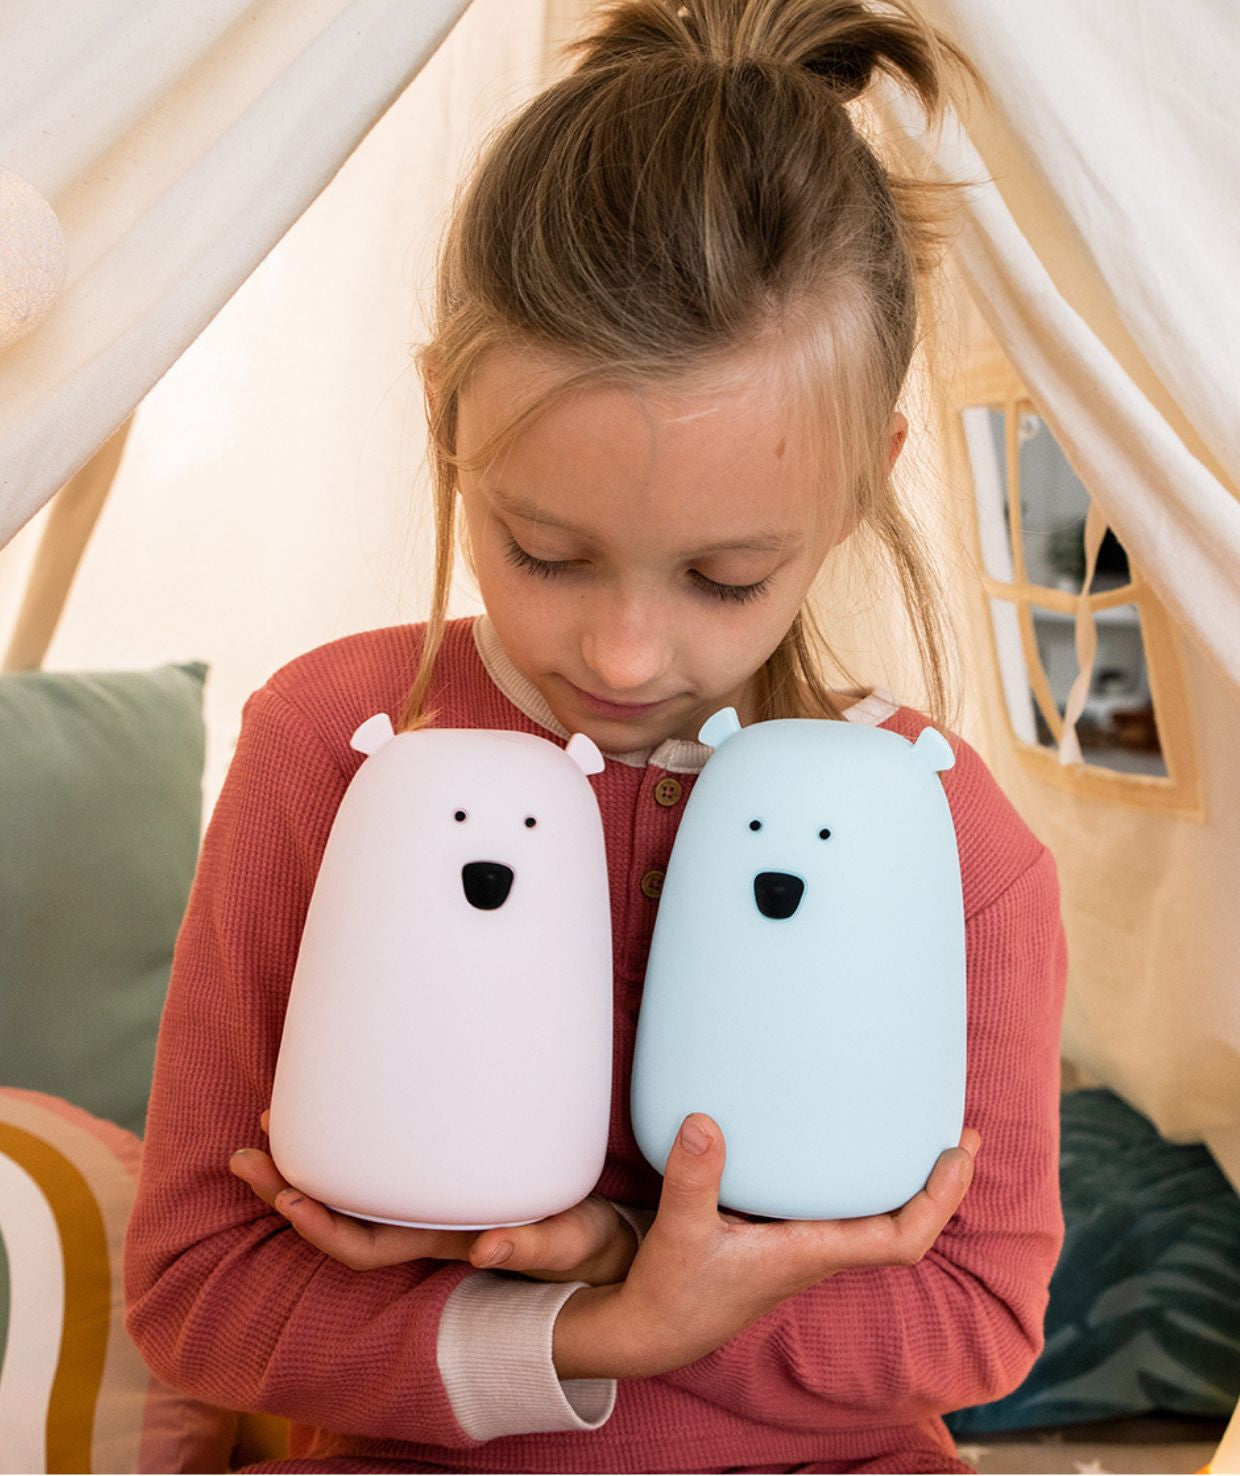 A girl holding a white and blue Big Bear silicone lamp with a charming teddy bear shape, perfect for bedtime routines and comforting children.